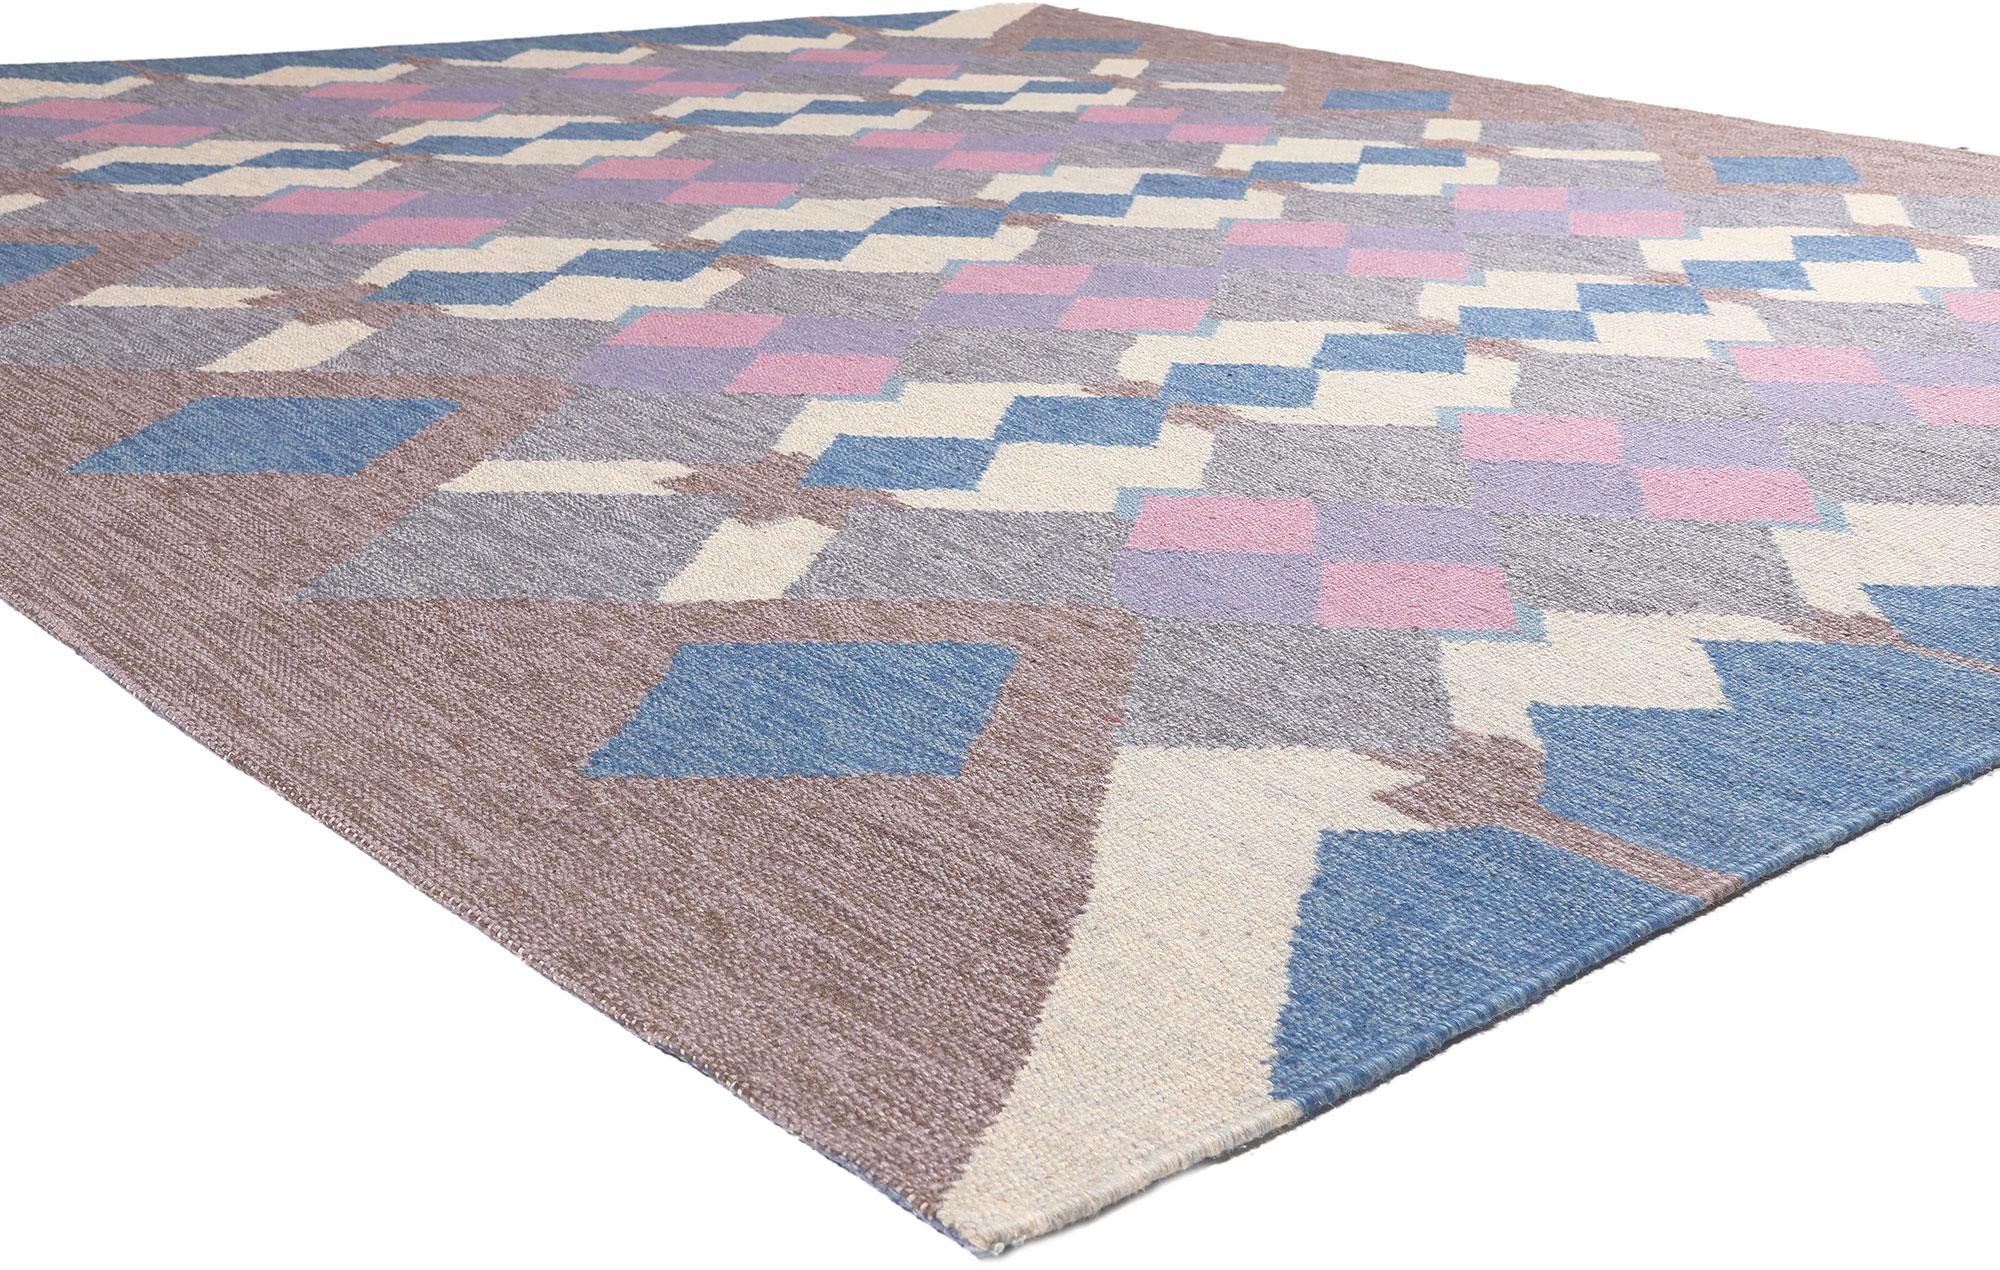 30976 Judith Johansson Swedish Style Kilim Rug, 09'10 x 10'03.
With its Scandinavian Modern style, incredible detail and texture, this handwoven wool Swedish style kilim rug is a captivating vision of woven beauty. The eye-catching geometric design